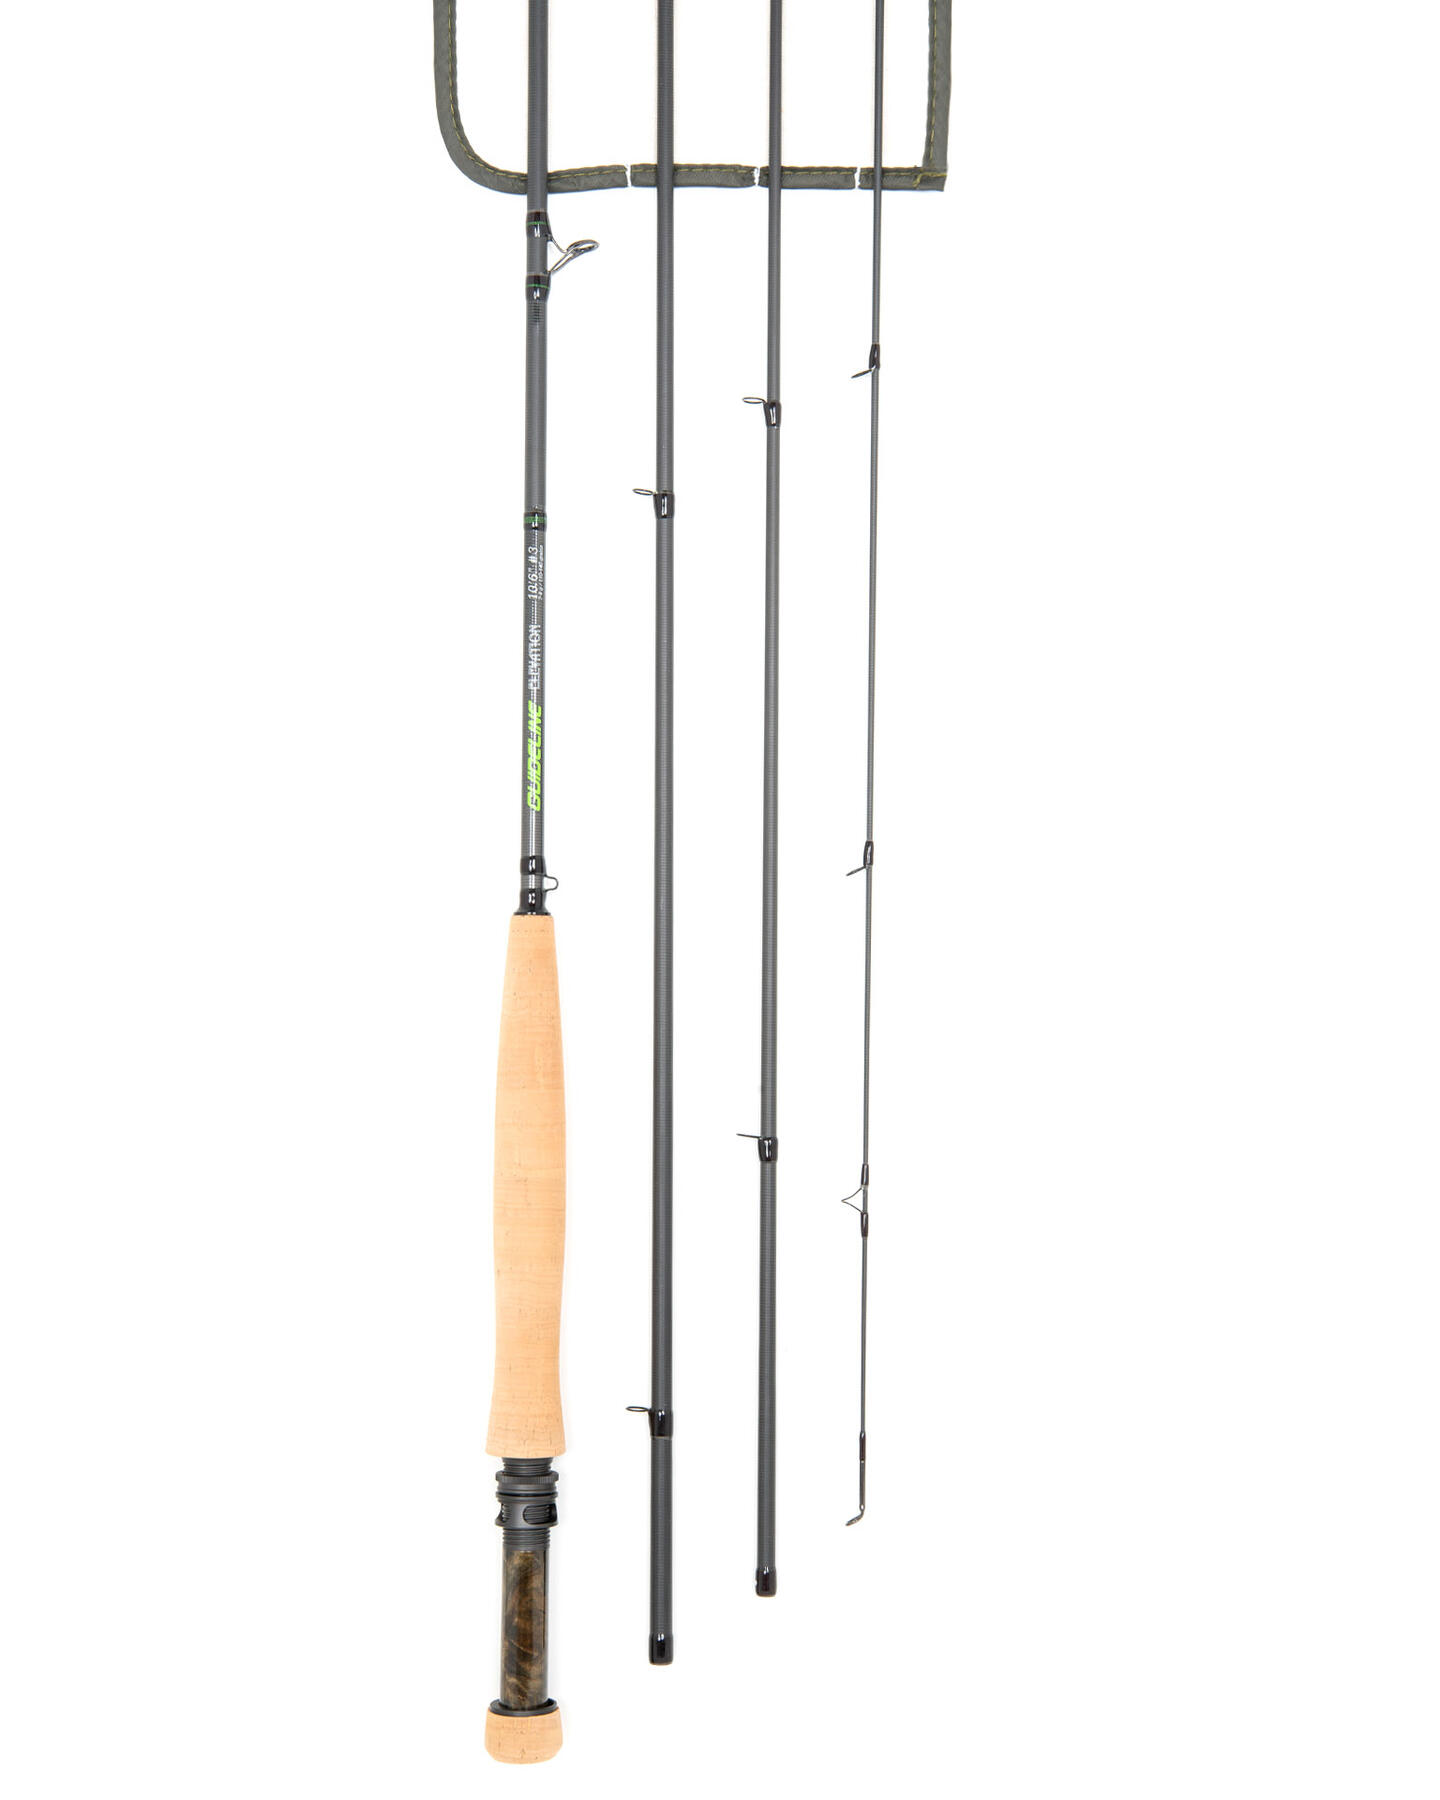 https://www.czechnymph.com/data/web/eshop/guideline/new-products-2024/fly-rods/elevation-nymph/guideline-elevation-nymph-euro-nymphing-main.jpeg